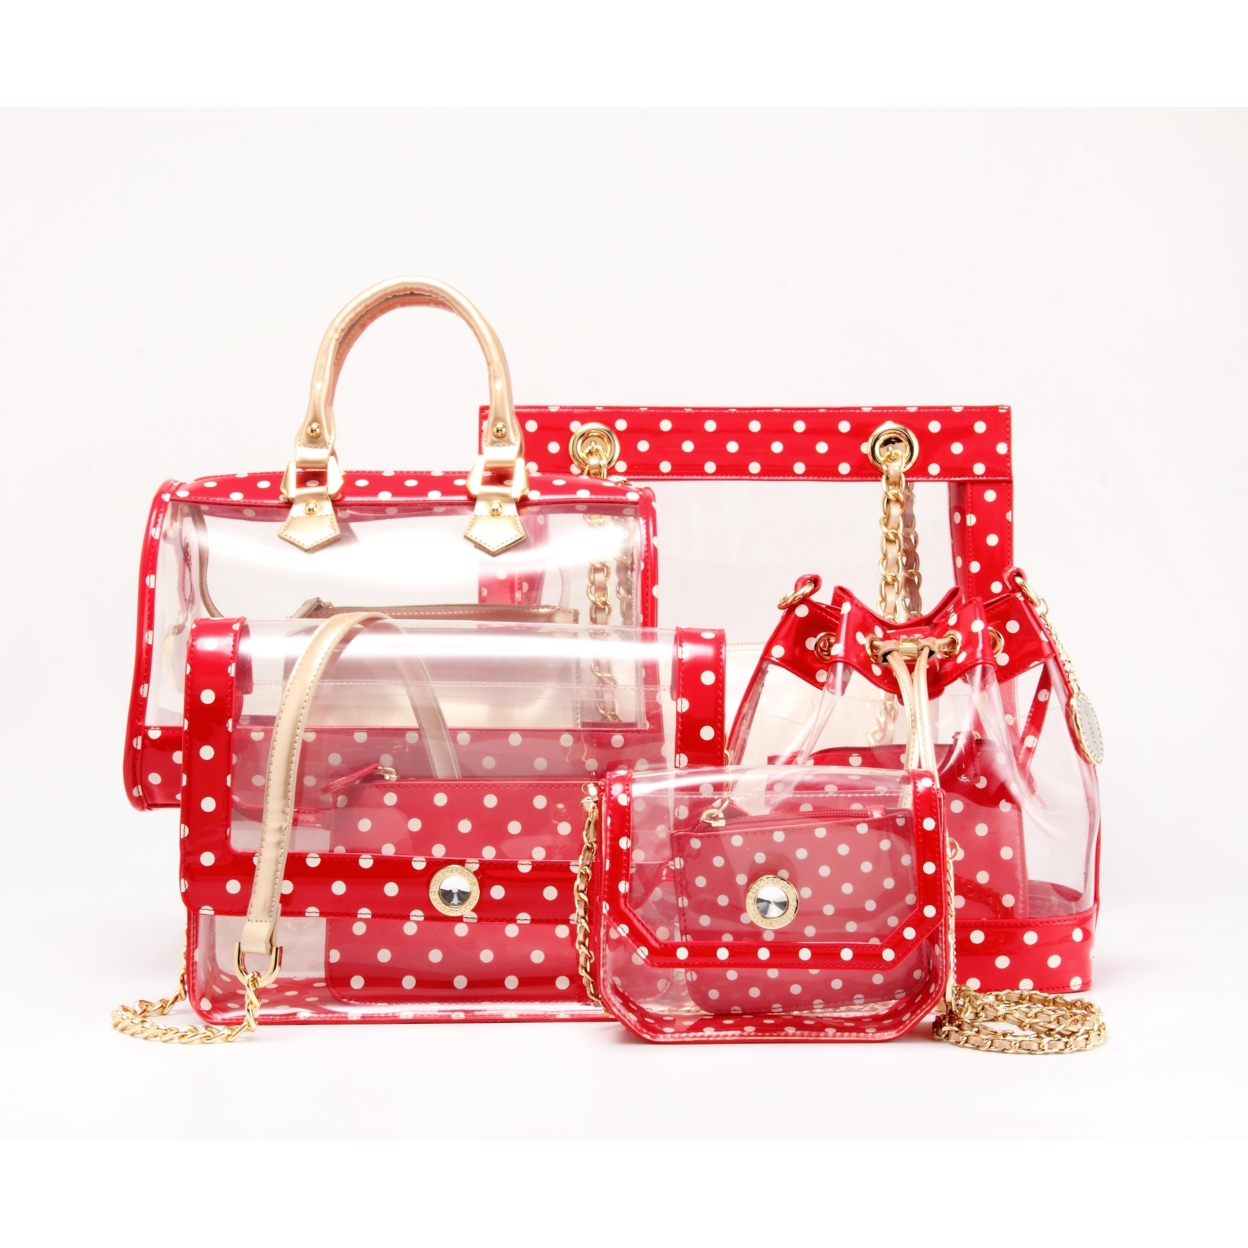 SCORE! Andrea Large Clear Designer Tote For School, Work, Travel - Red And Gold